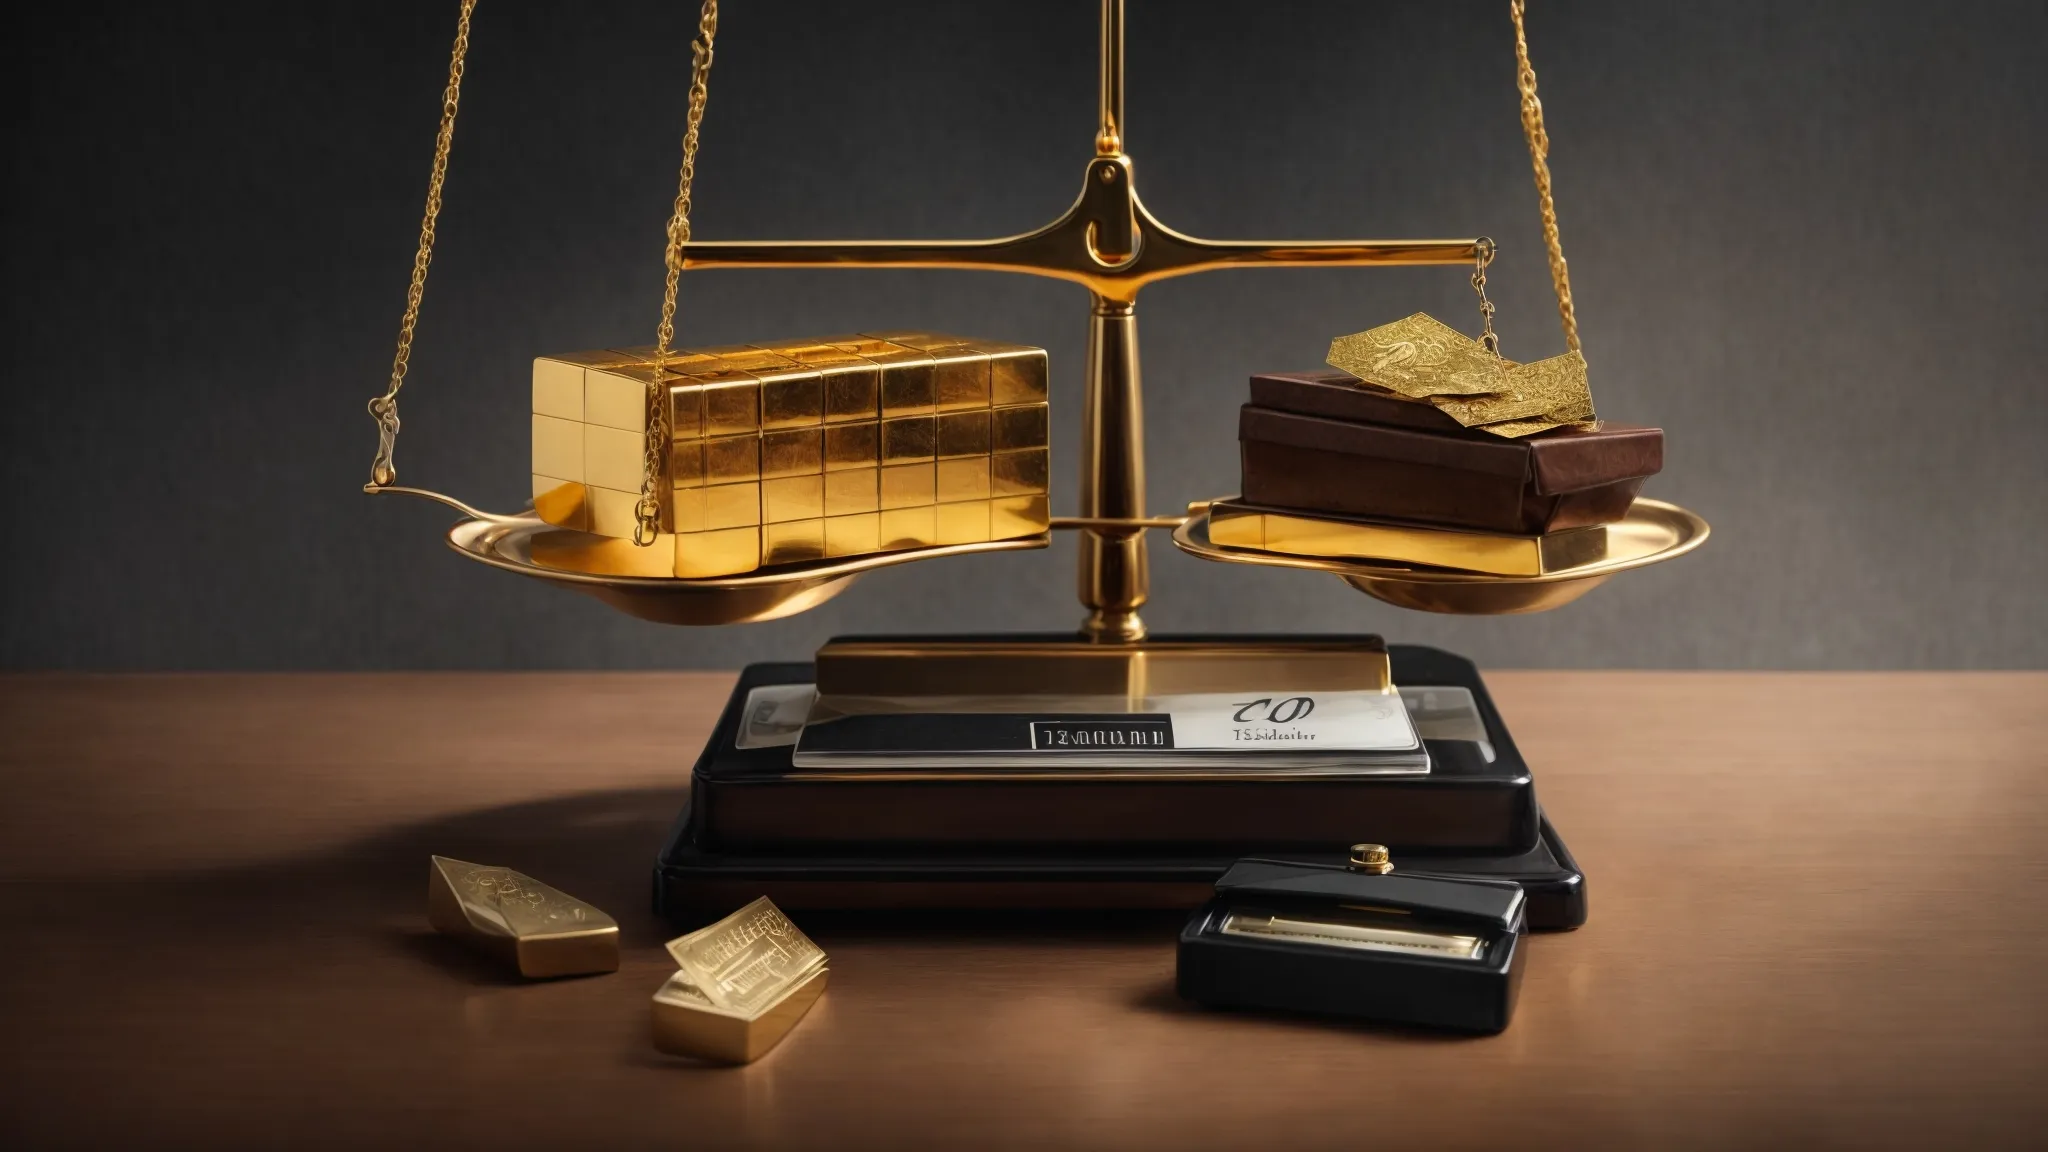 a balance scale with one side weighed down by gold bars and the other holding an empty wallet signifies the financial imbalance in isds arbitrations.